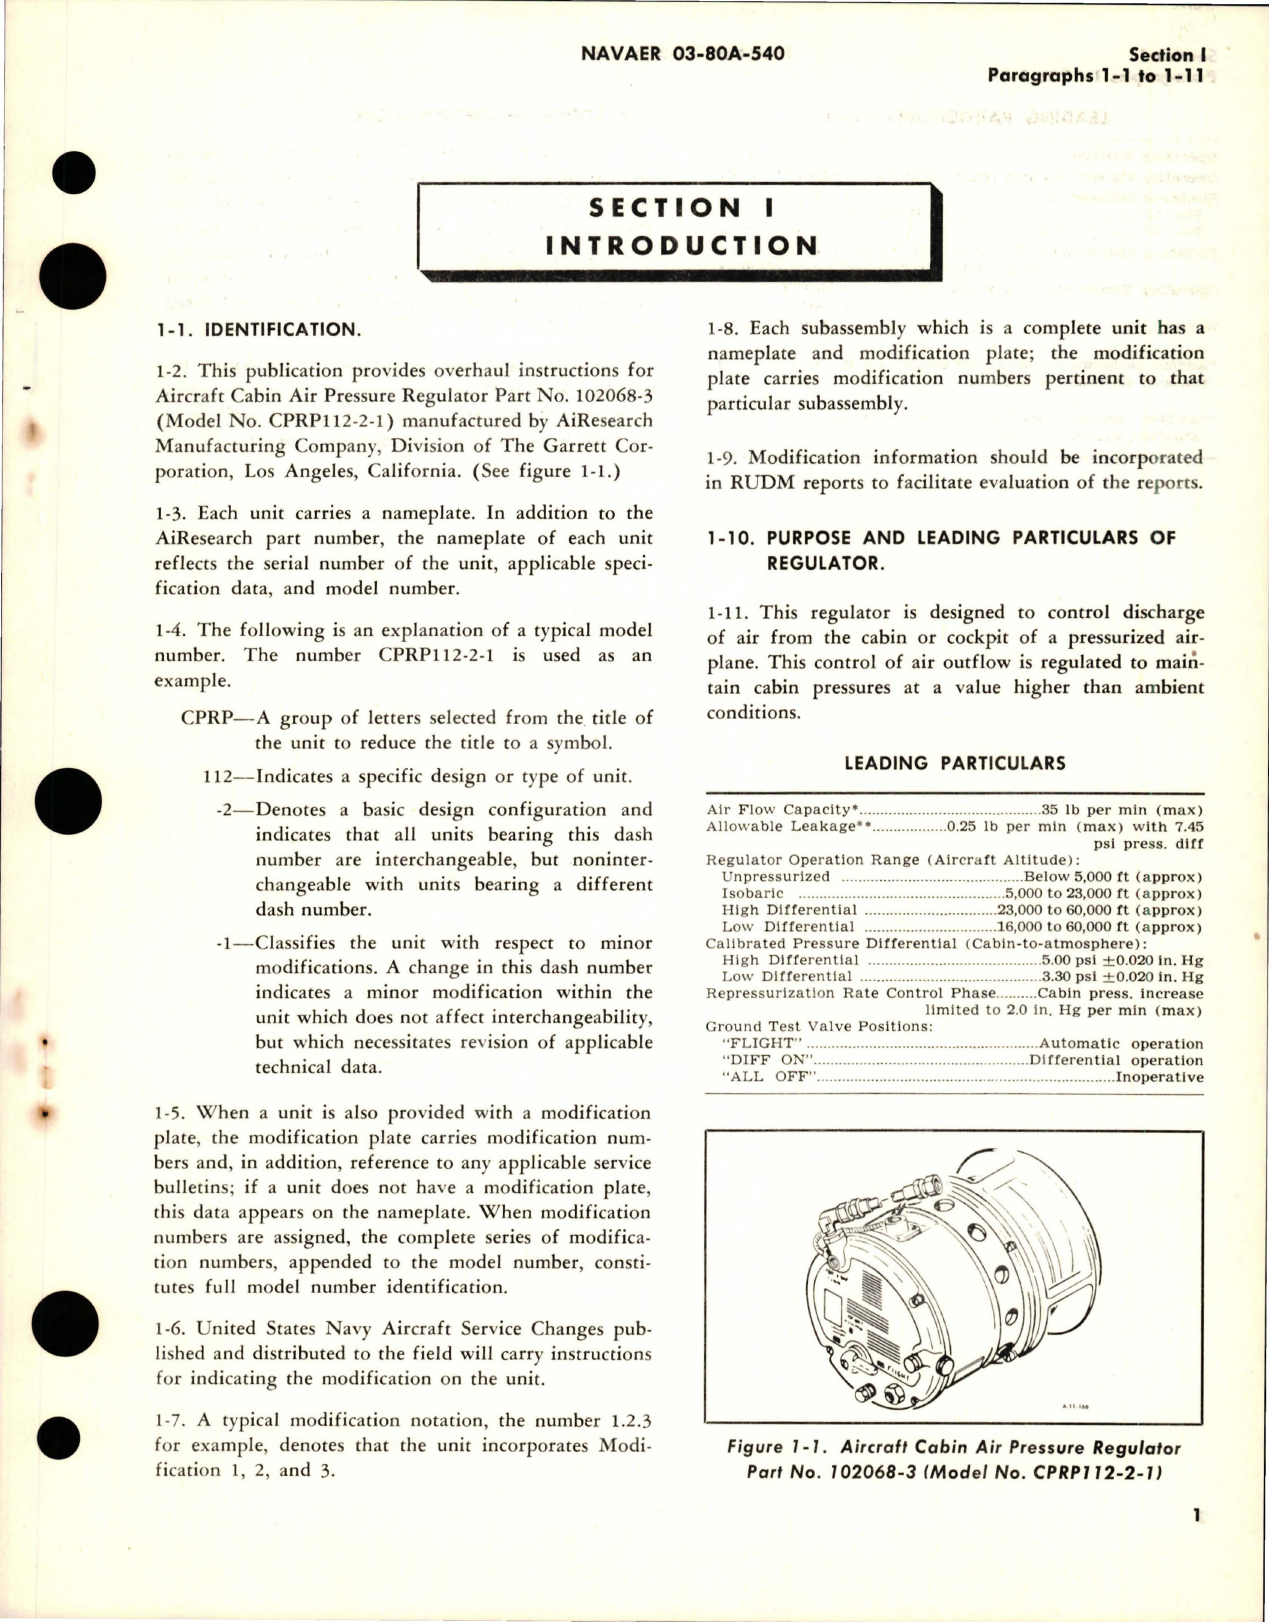 Sample page 5 from AirCorps Library document: Overhaul Instructions for Aircraft Cabin Air Pressure Regulator - Part 102068-3 - Model CPRP112-2 